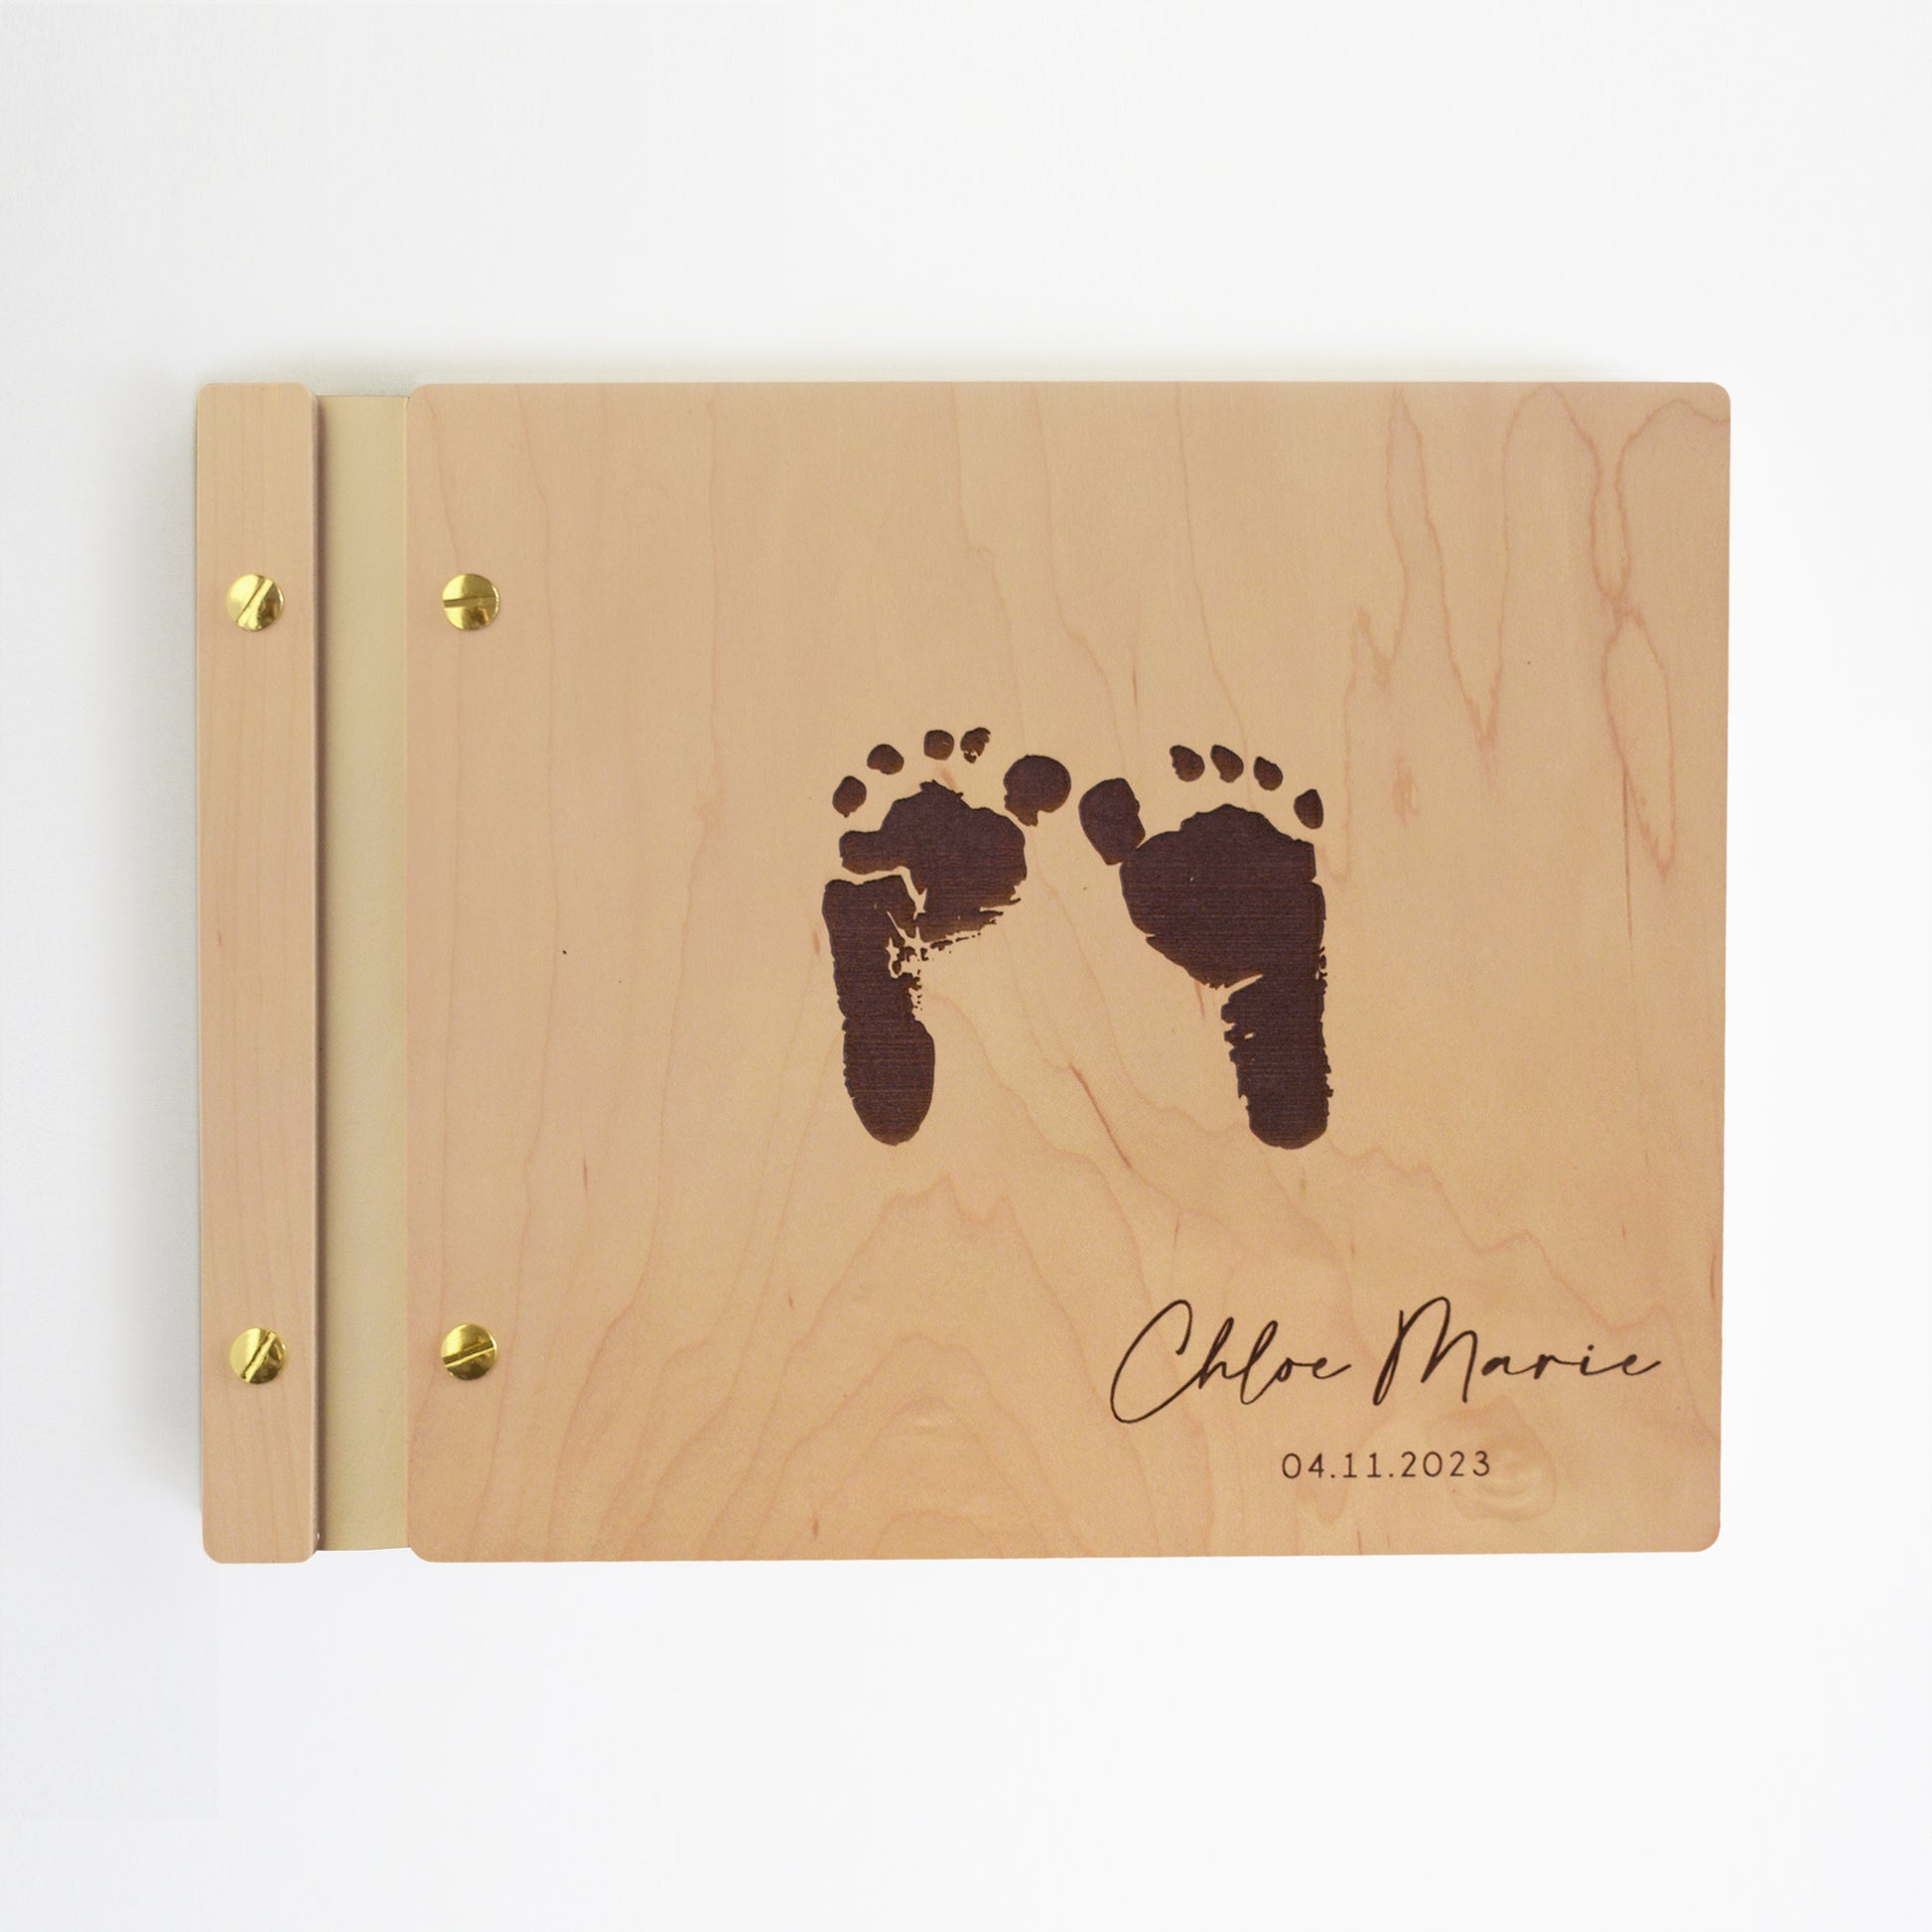 An 8.5x11" guest book lies on a table. Made of maple wood, ivory vegan leather binding, and gold hardware. The front cover has engraved baby foot prints with the words Chloe Marie 04.11.2023.